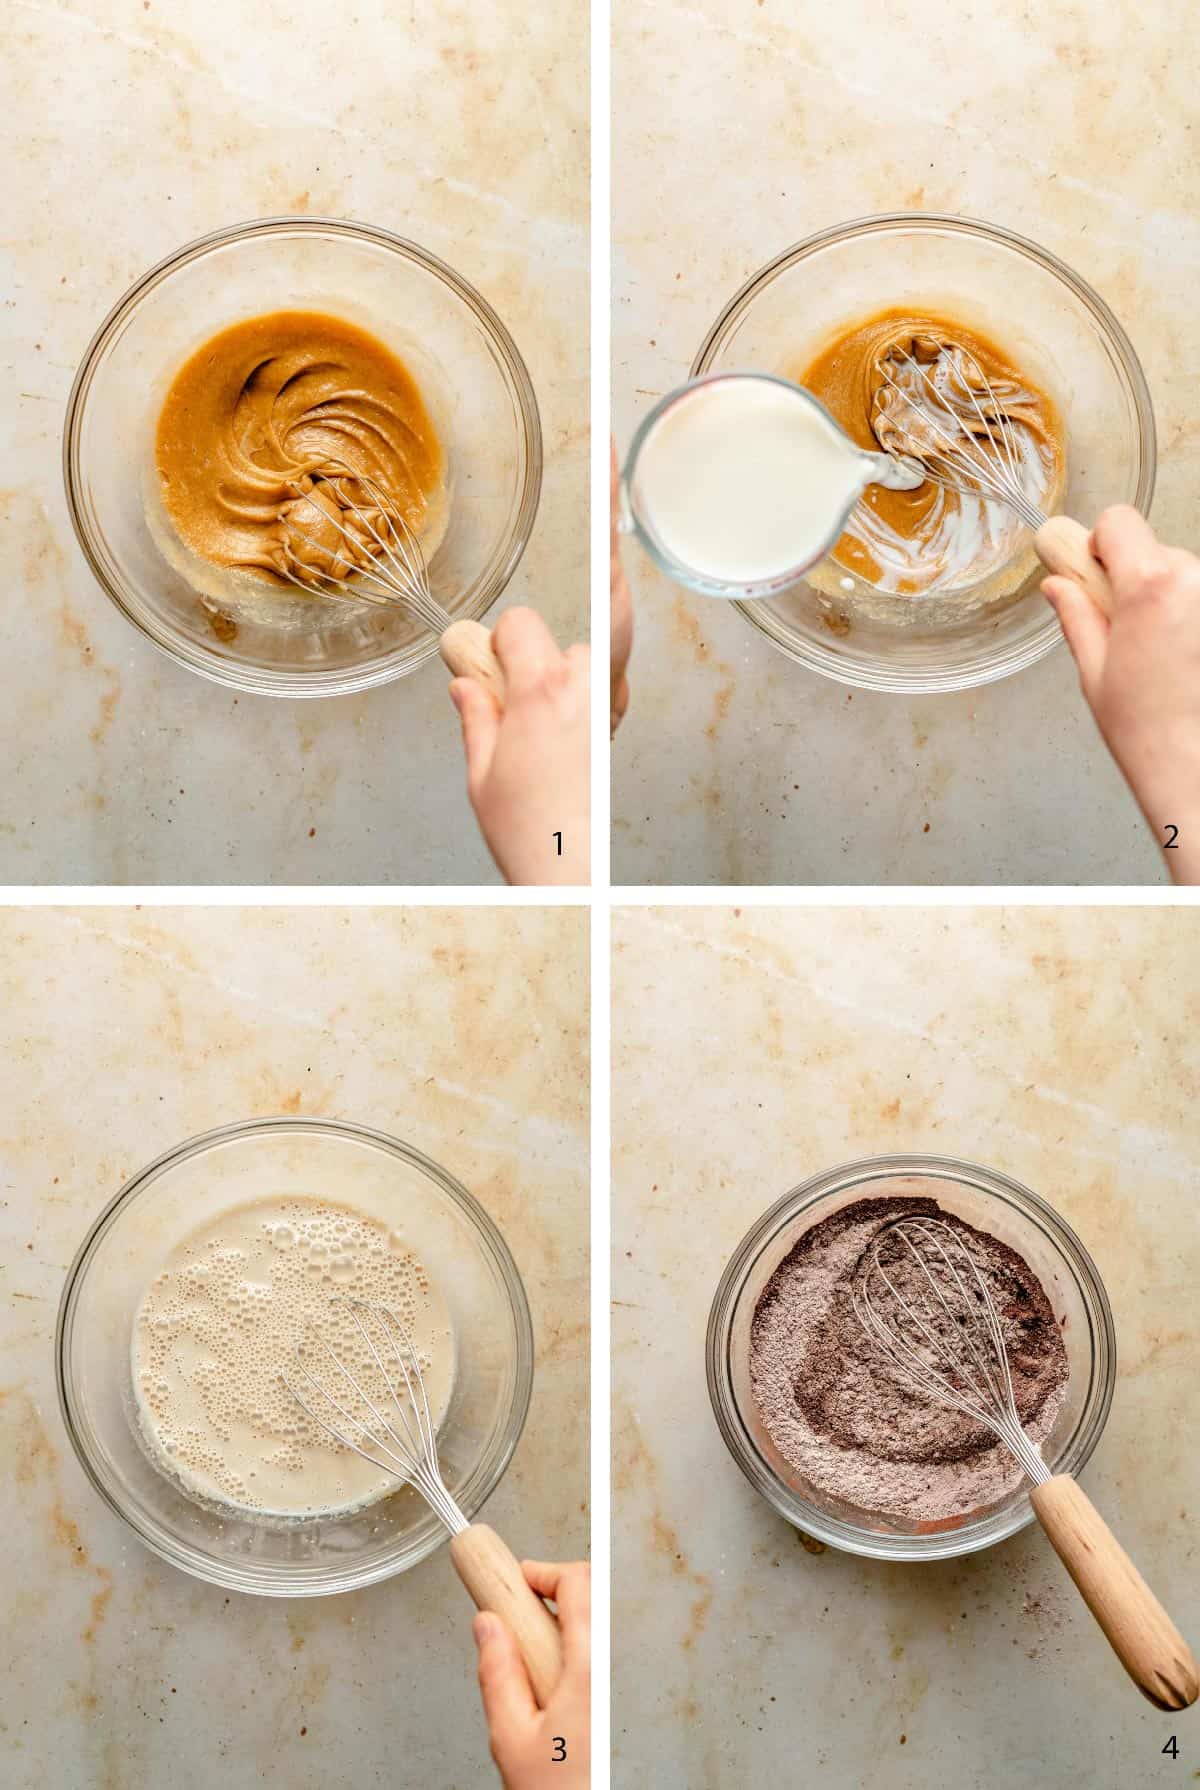 Process steps of making the batter for the pancakes in a bowl with a whisk